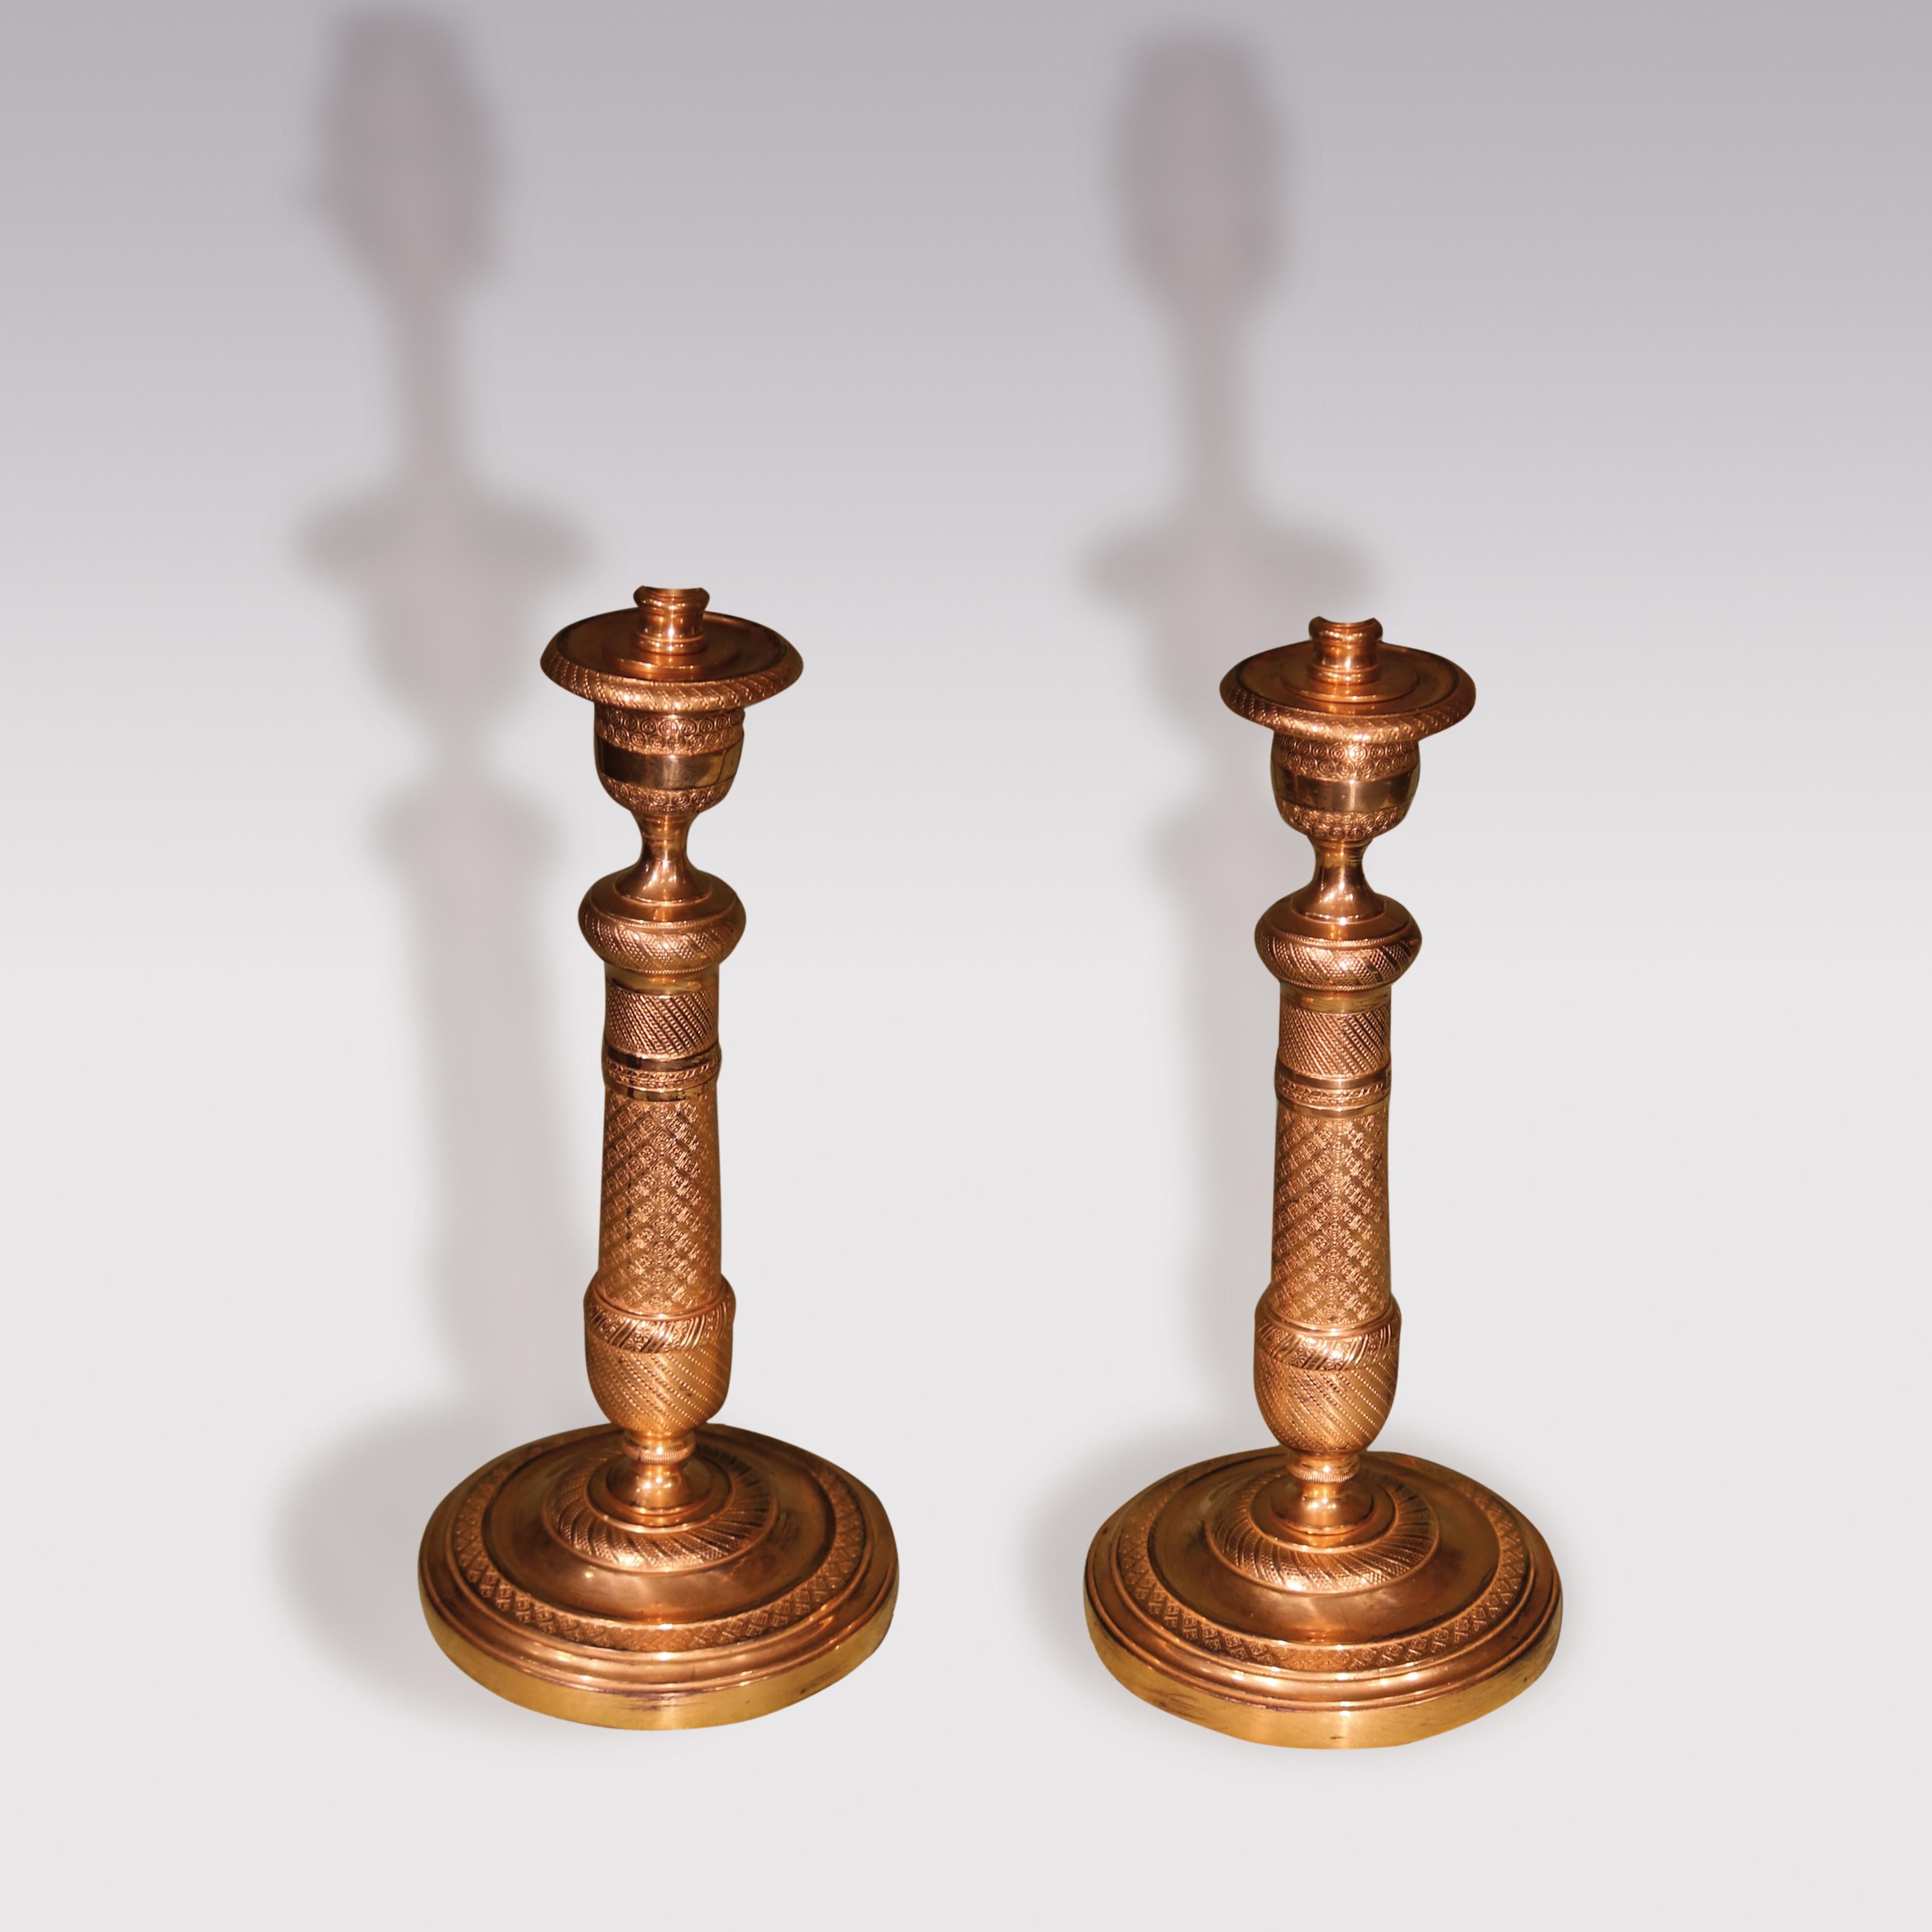 A pair of early 19th century ormolu candlesticks, engine -turned throughout, having urn-shaped nozzles above decorated tapering stems supported on circular bases. (Now converted to lamps).